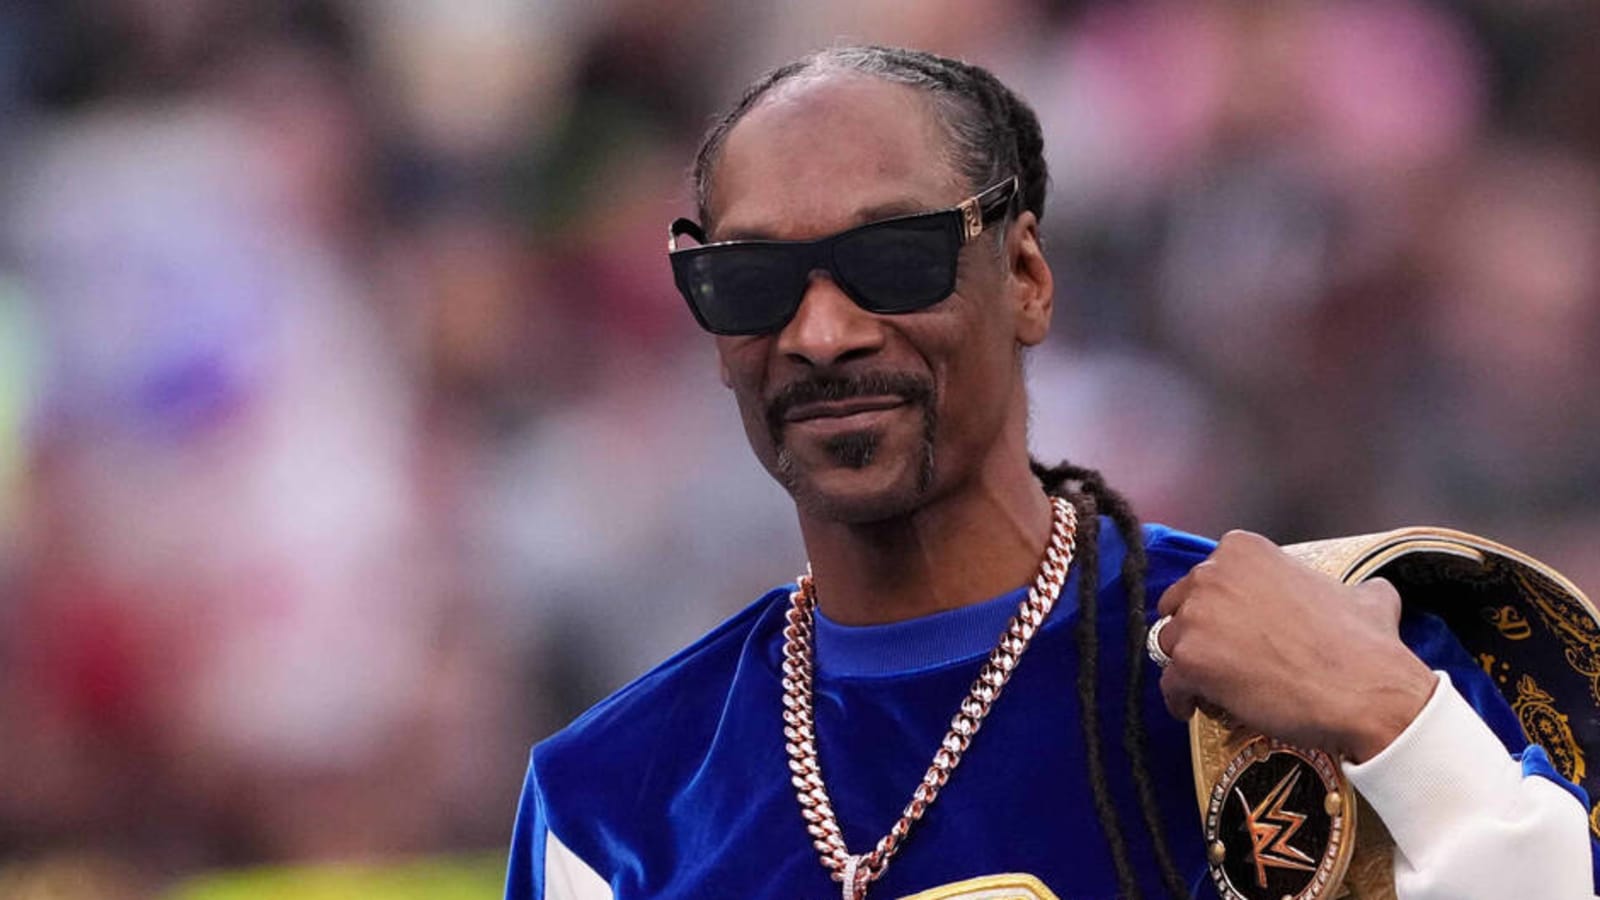 Snoop Dogg predicted ending to Lakers-Warriors game